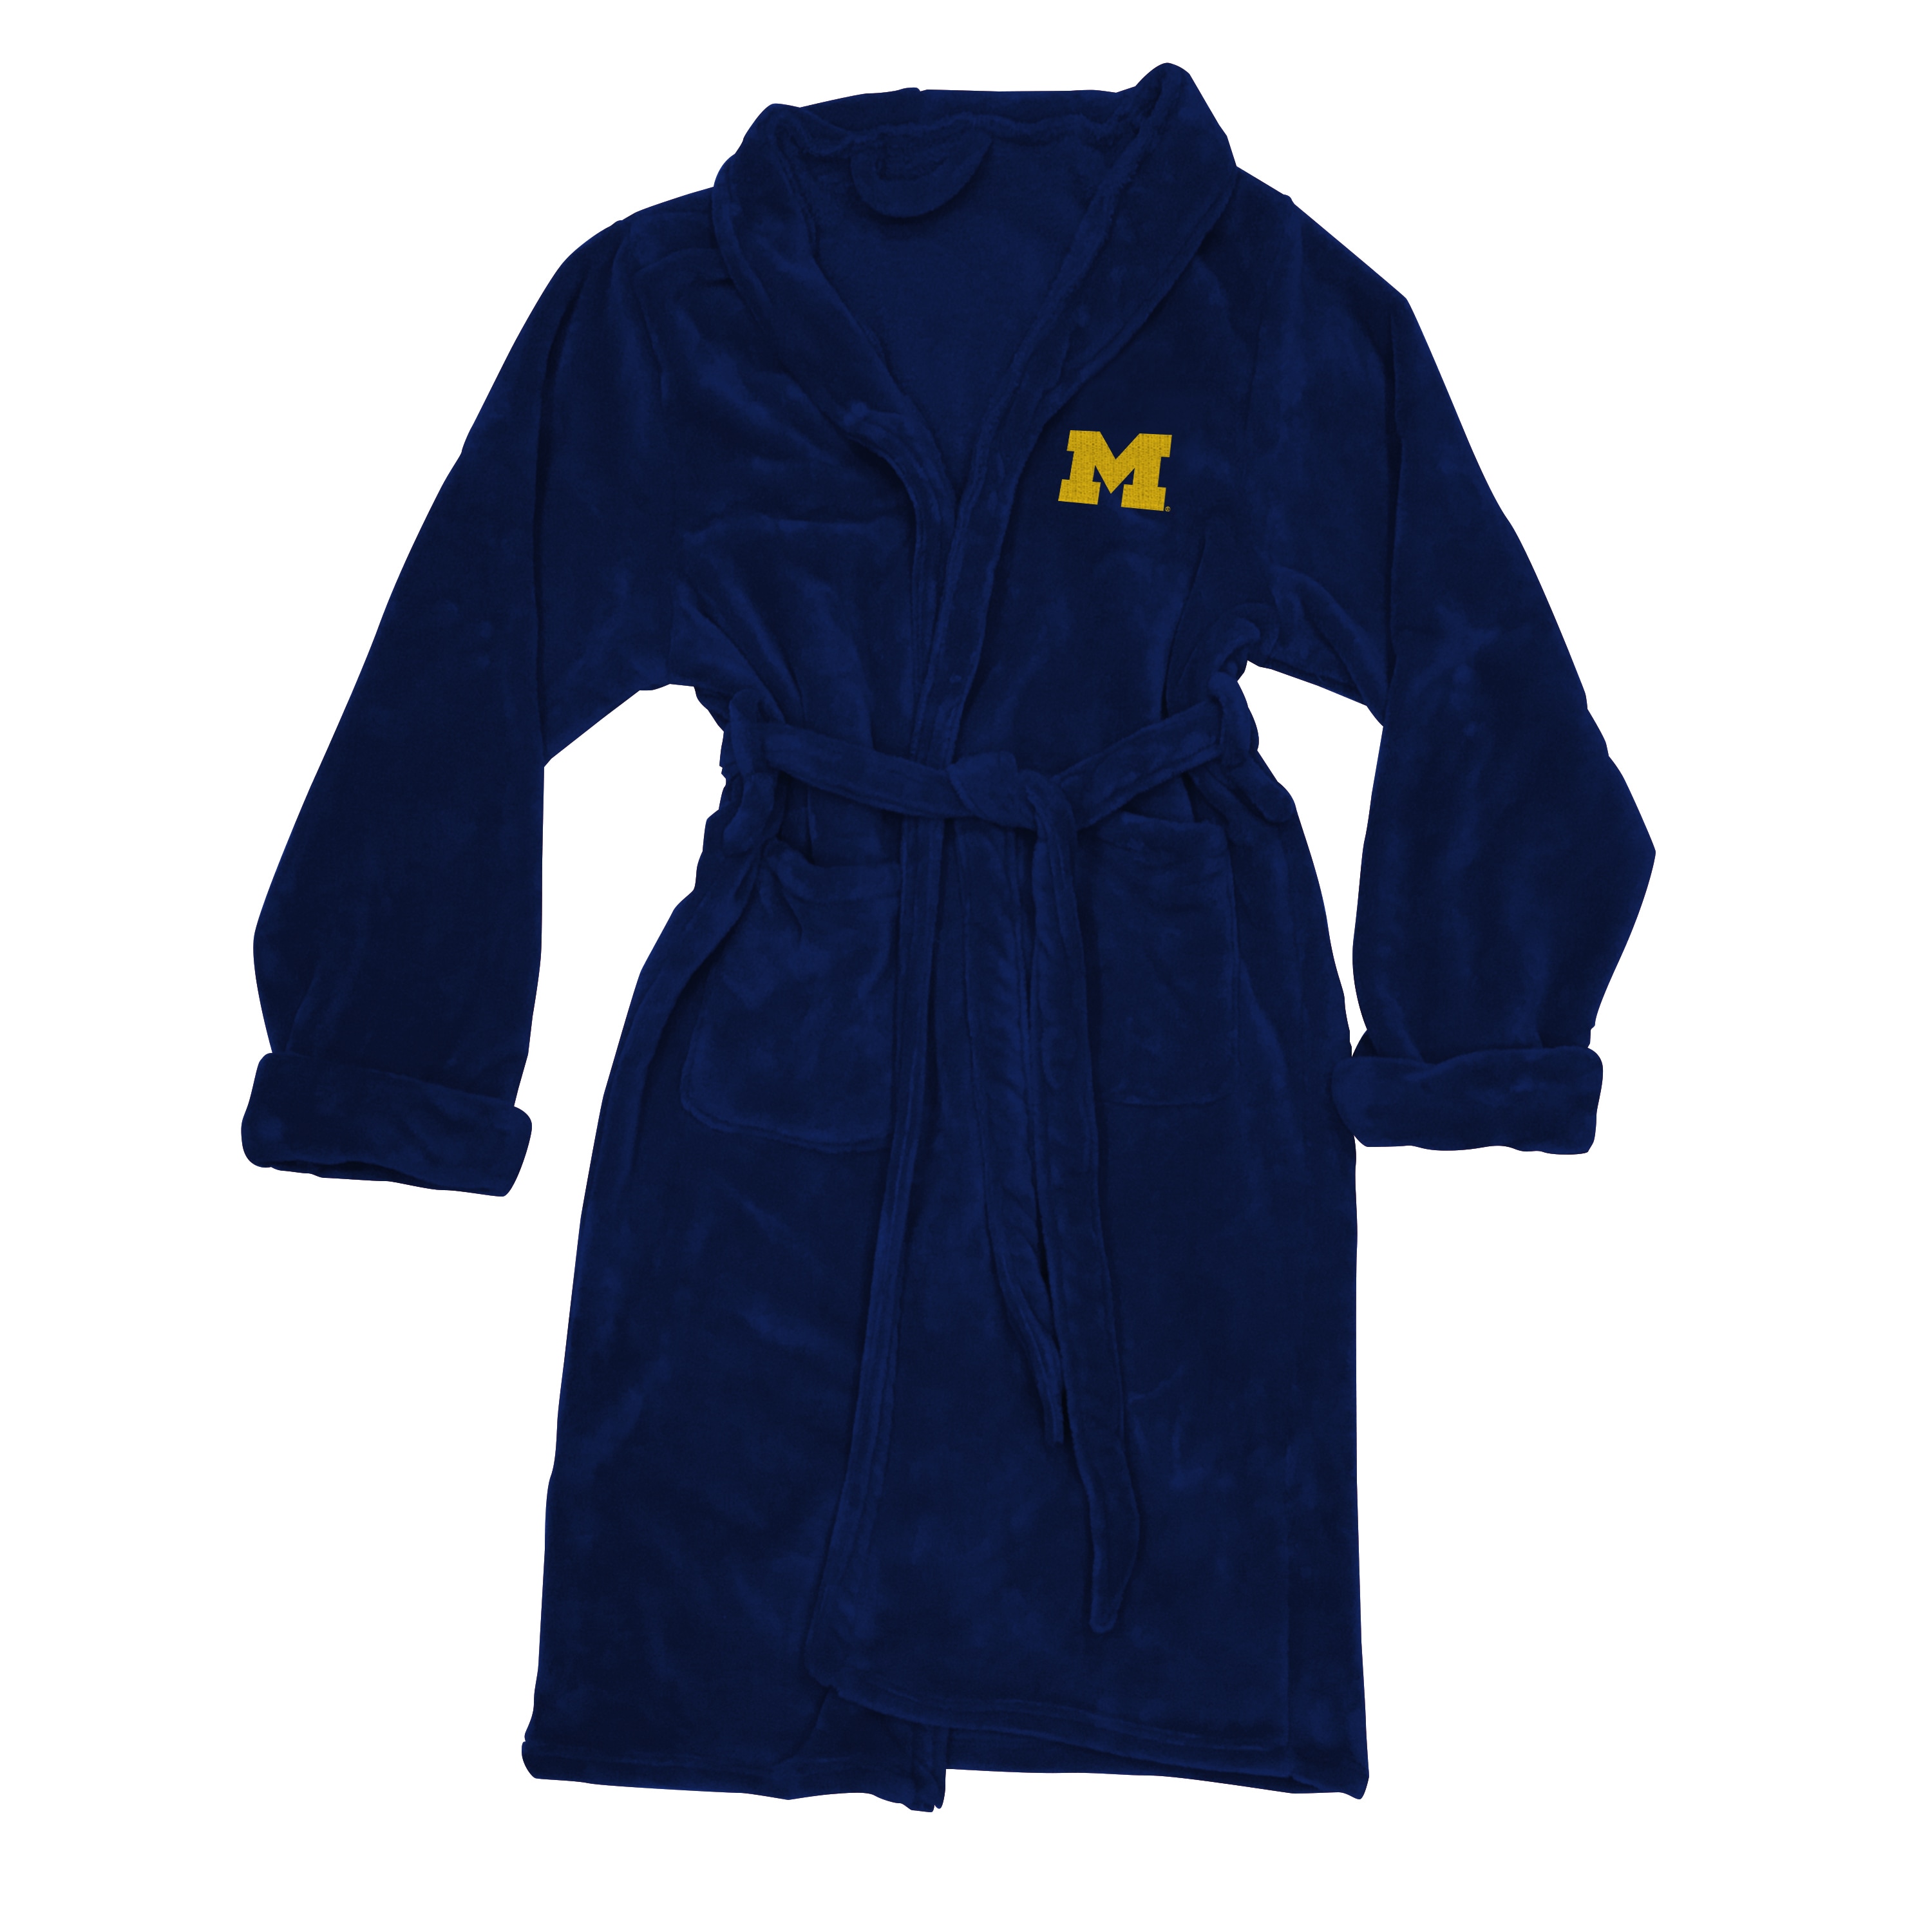 https://ak1.ostkcdn.com/images/products/12320488/COL-349-MichigaN-L-XL-Bathrobe-a88f5dad-4000-45f9-bf21-f68f6f6f7c03.jpg